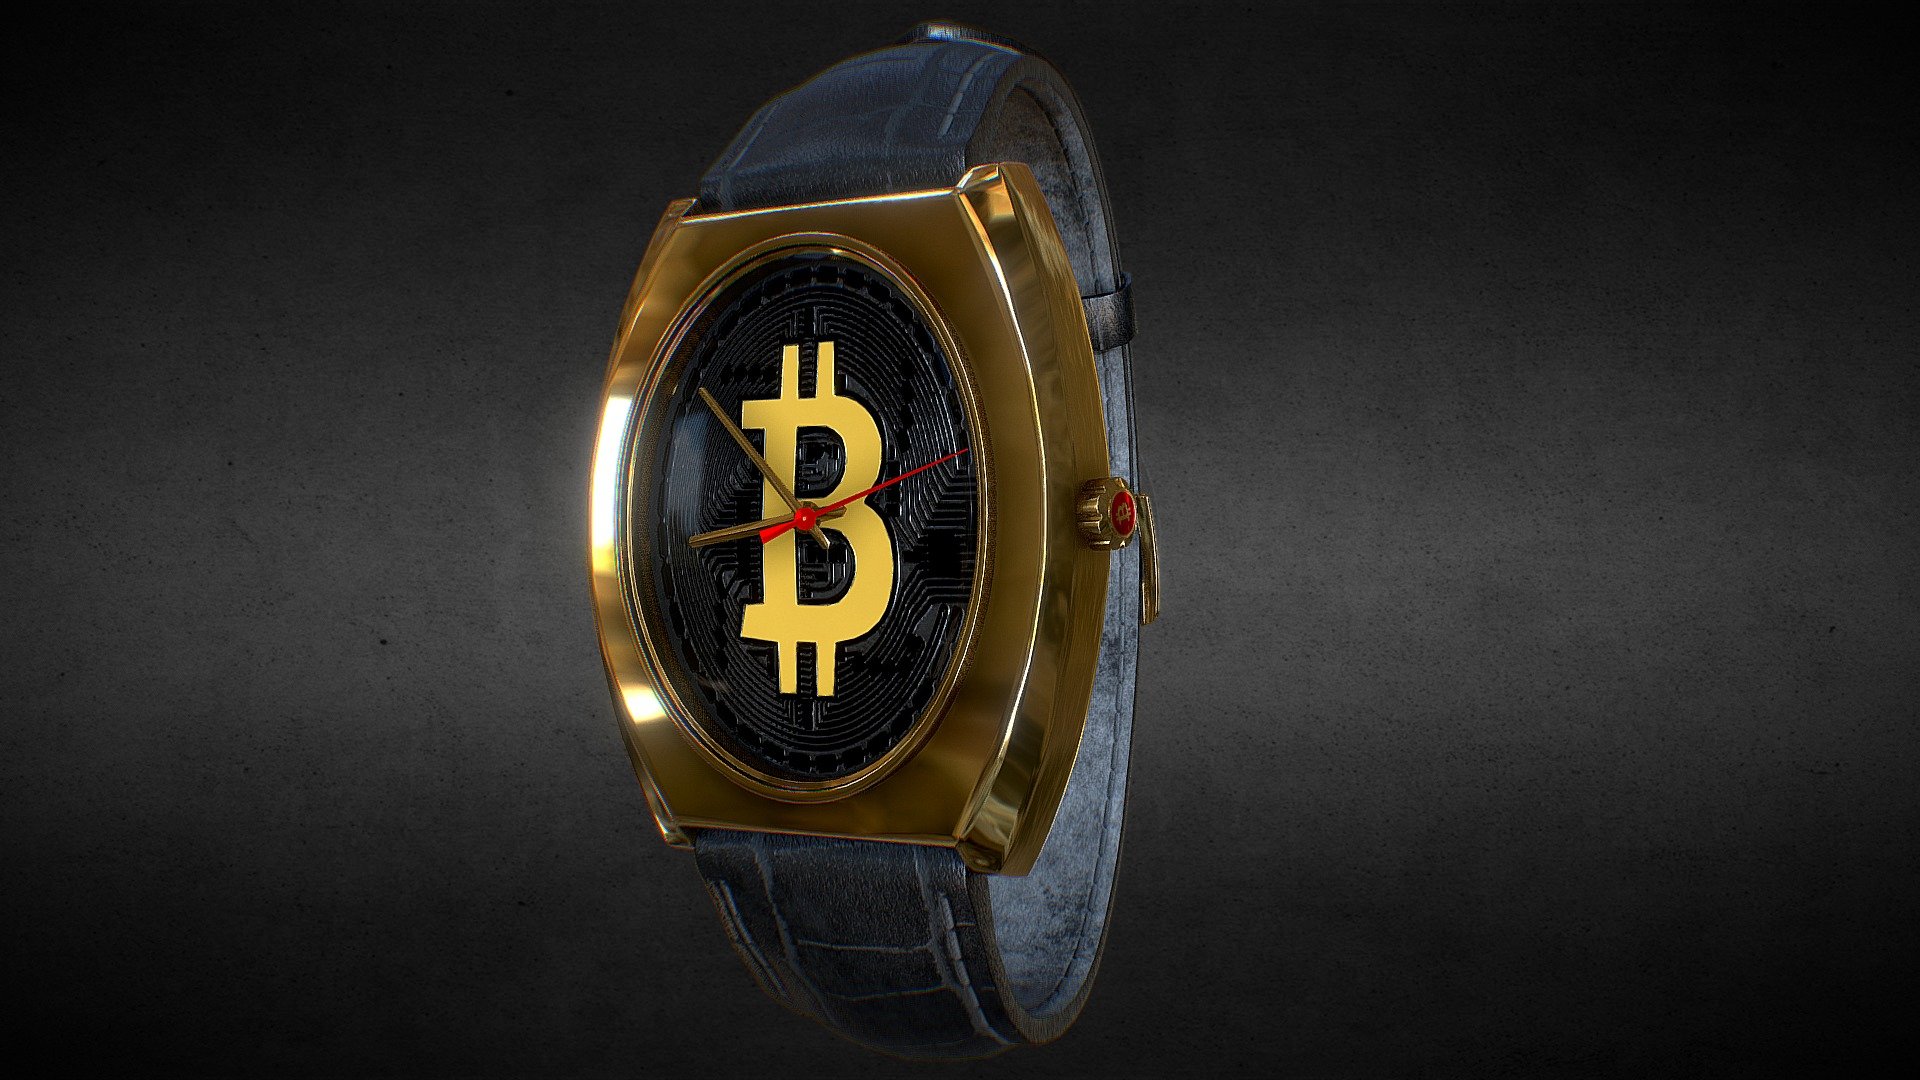 Awesome stainless steel Bitcoin watch.

Currently available for download in FBX format.

3D model developed by AR-Watches 3d model